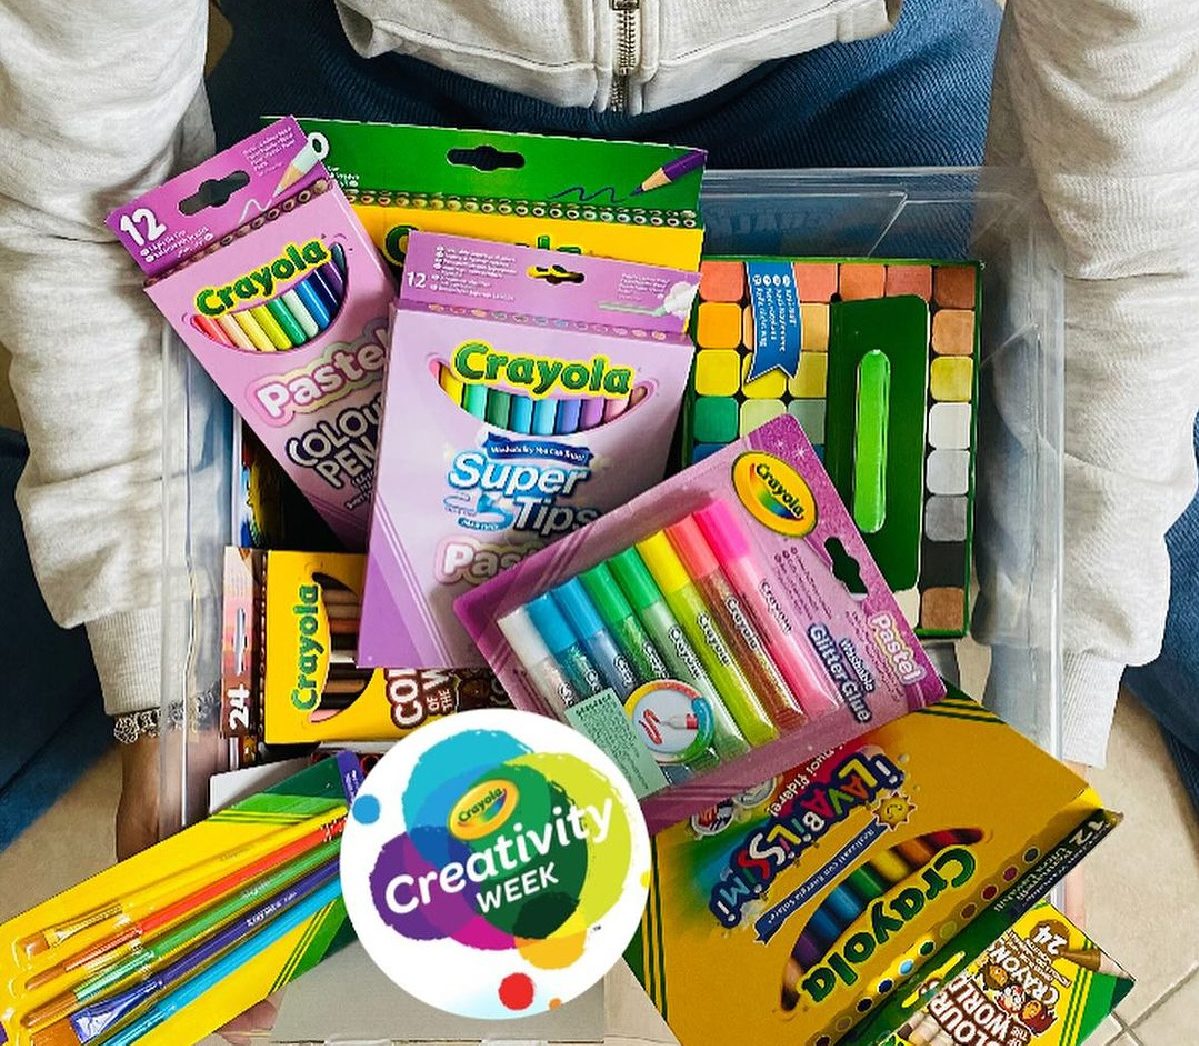 Crayola Creativity Week Student Photo from the official Creativity Week gallery